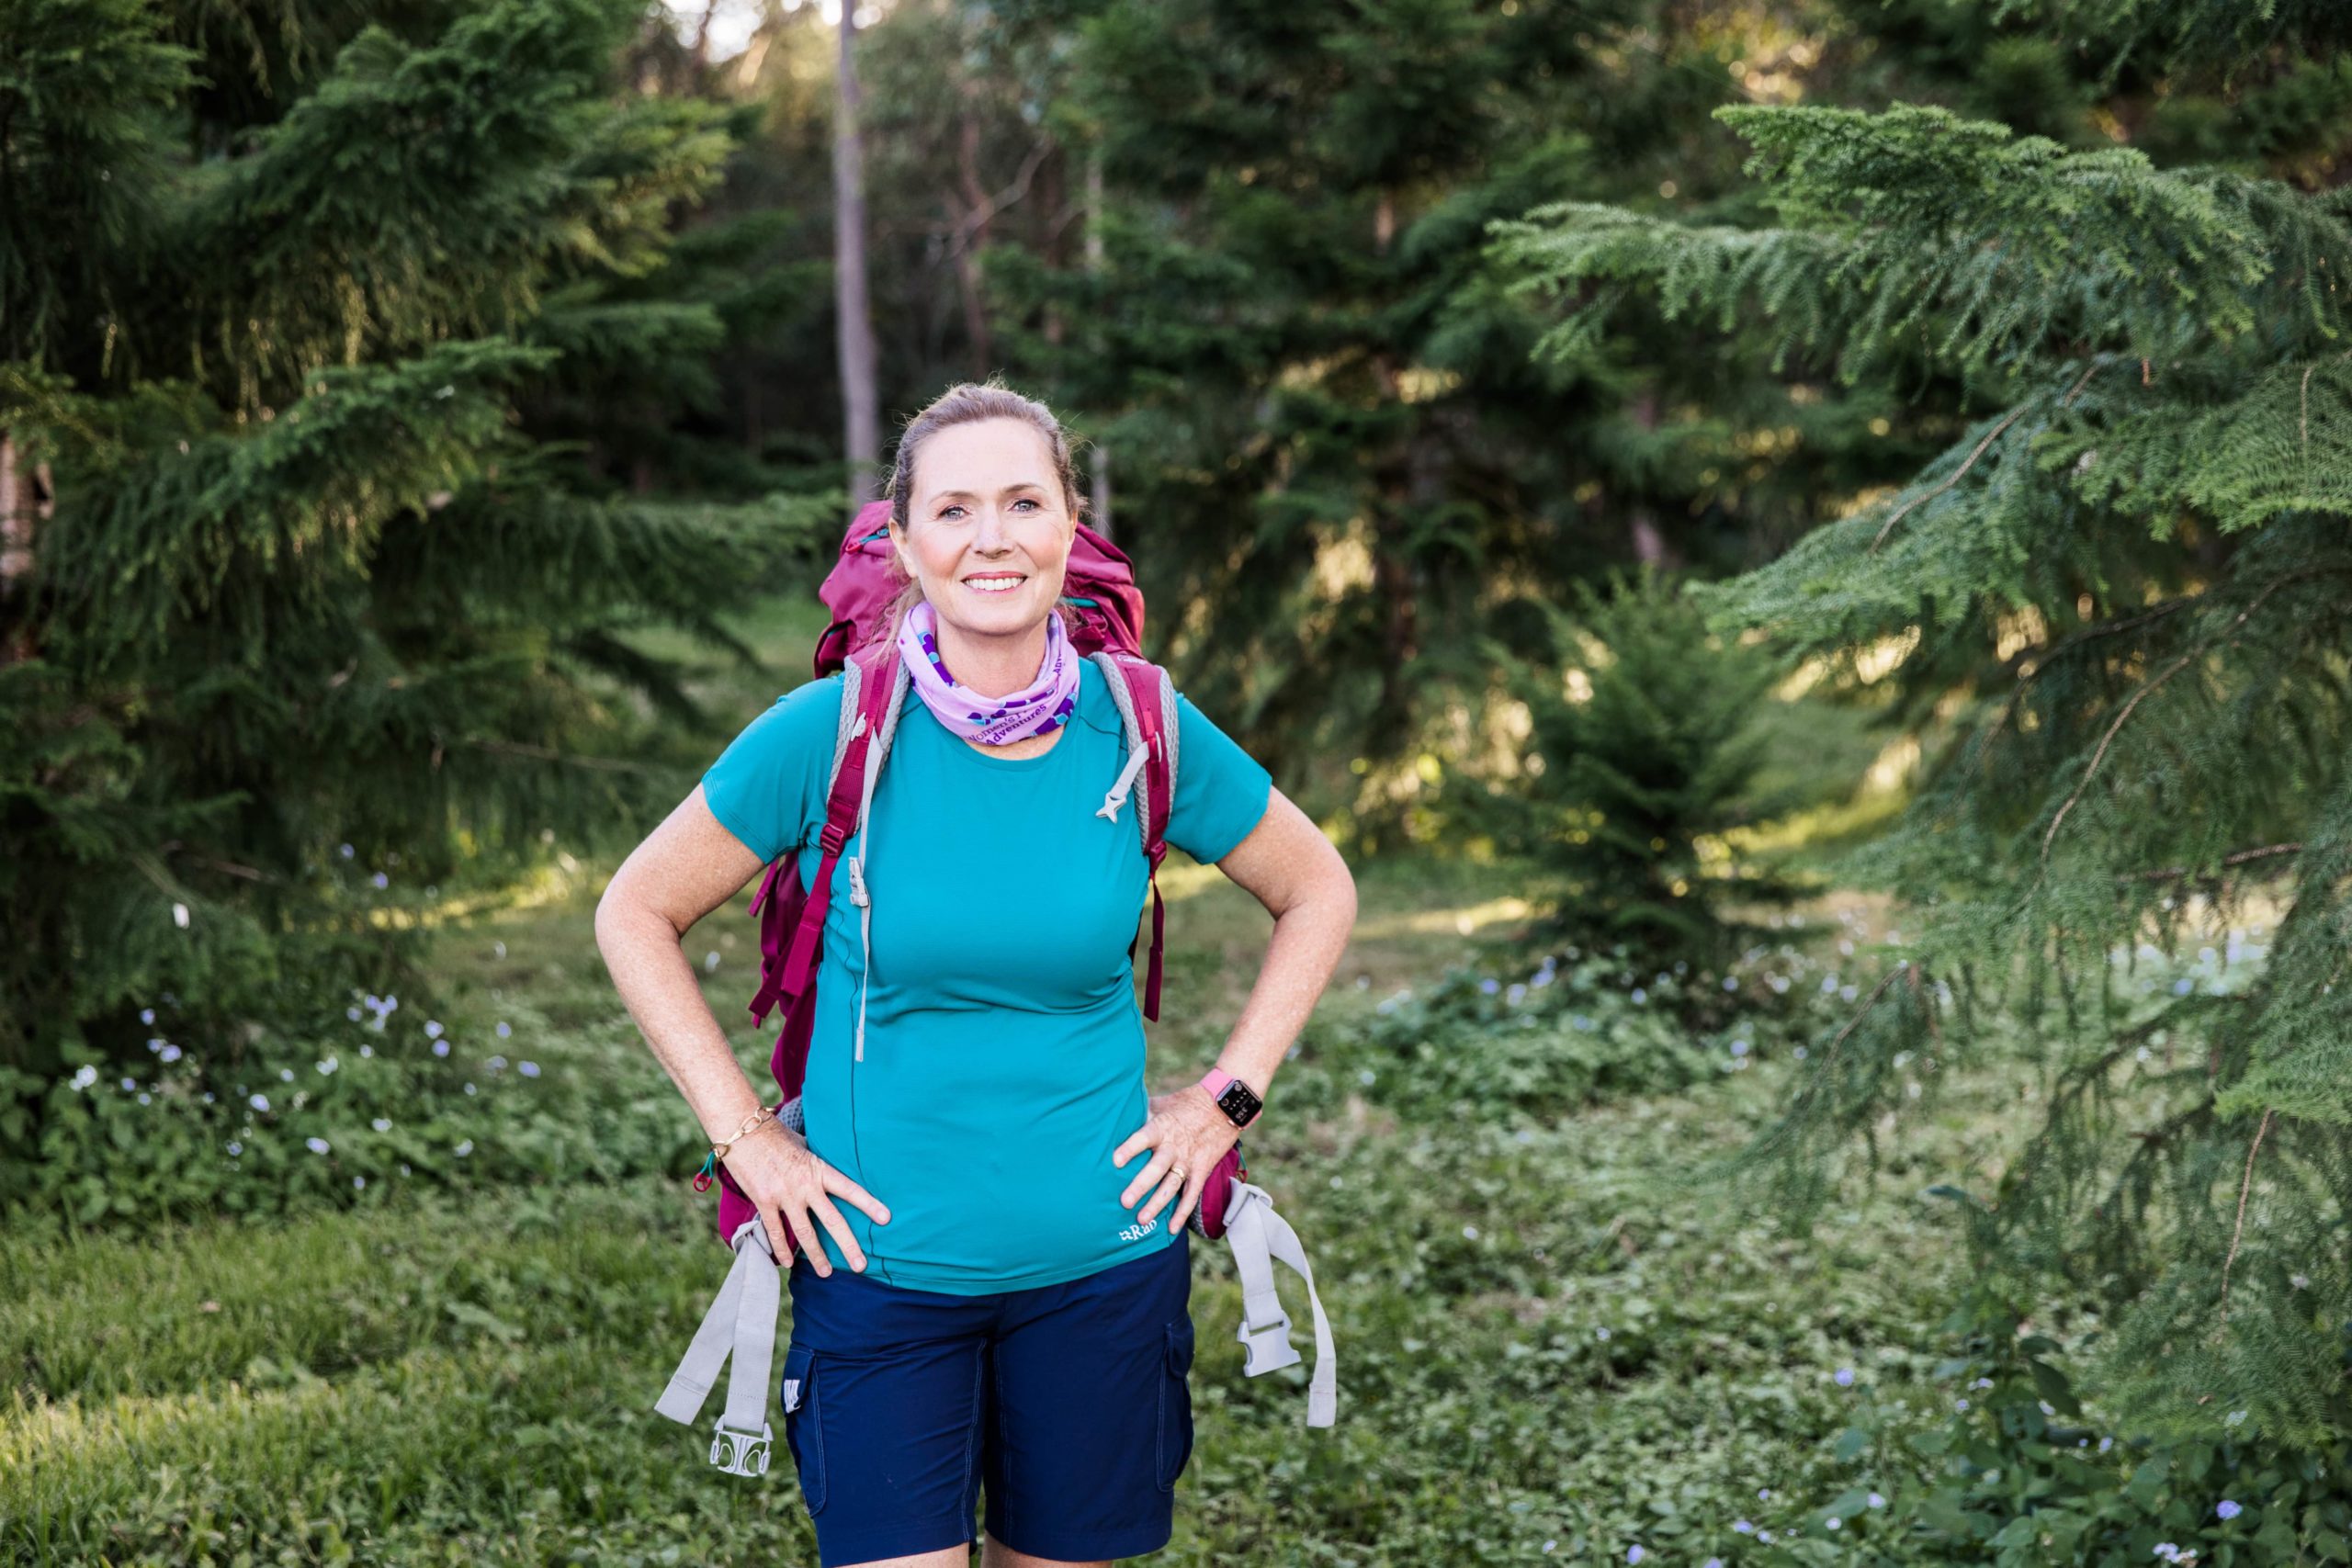 Jane MacDonald is C.R.E.W Leader and Chief Operating Officer for Women's Fitness Adventures